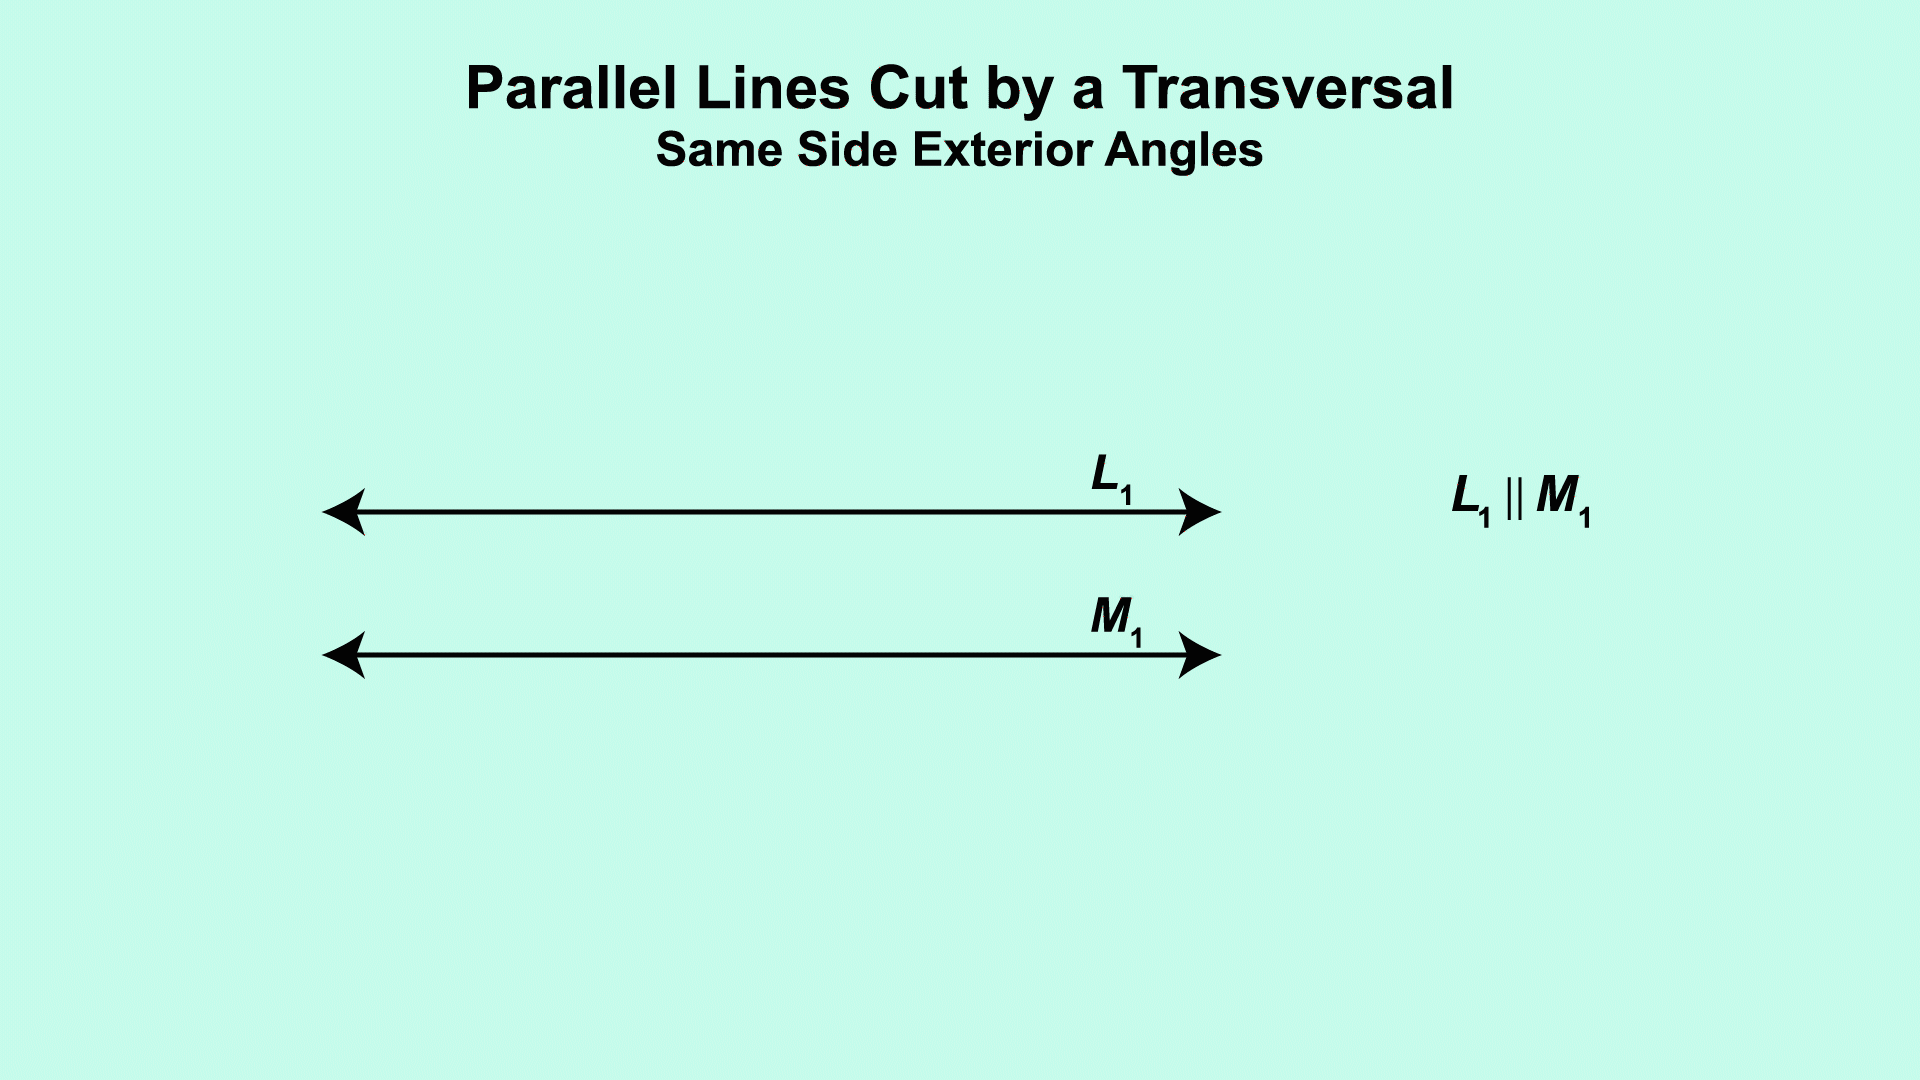 This piece of animated math clip art shows the two sets of same side exterior angles formed when two parallel lines are cut by a transversal.